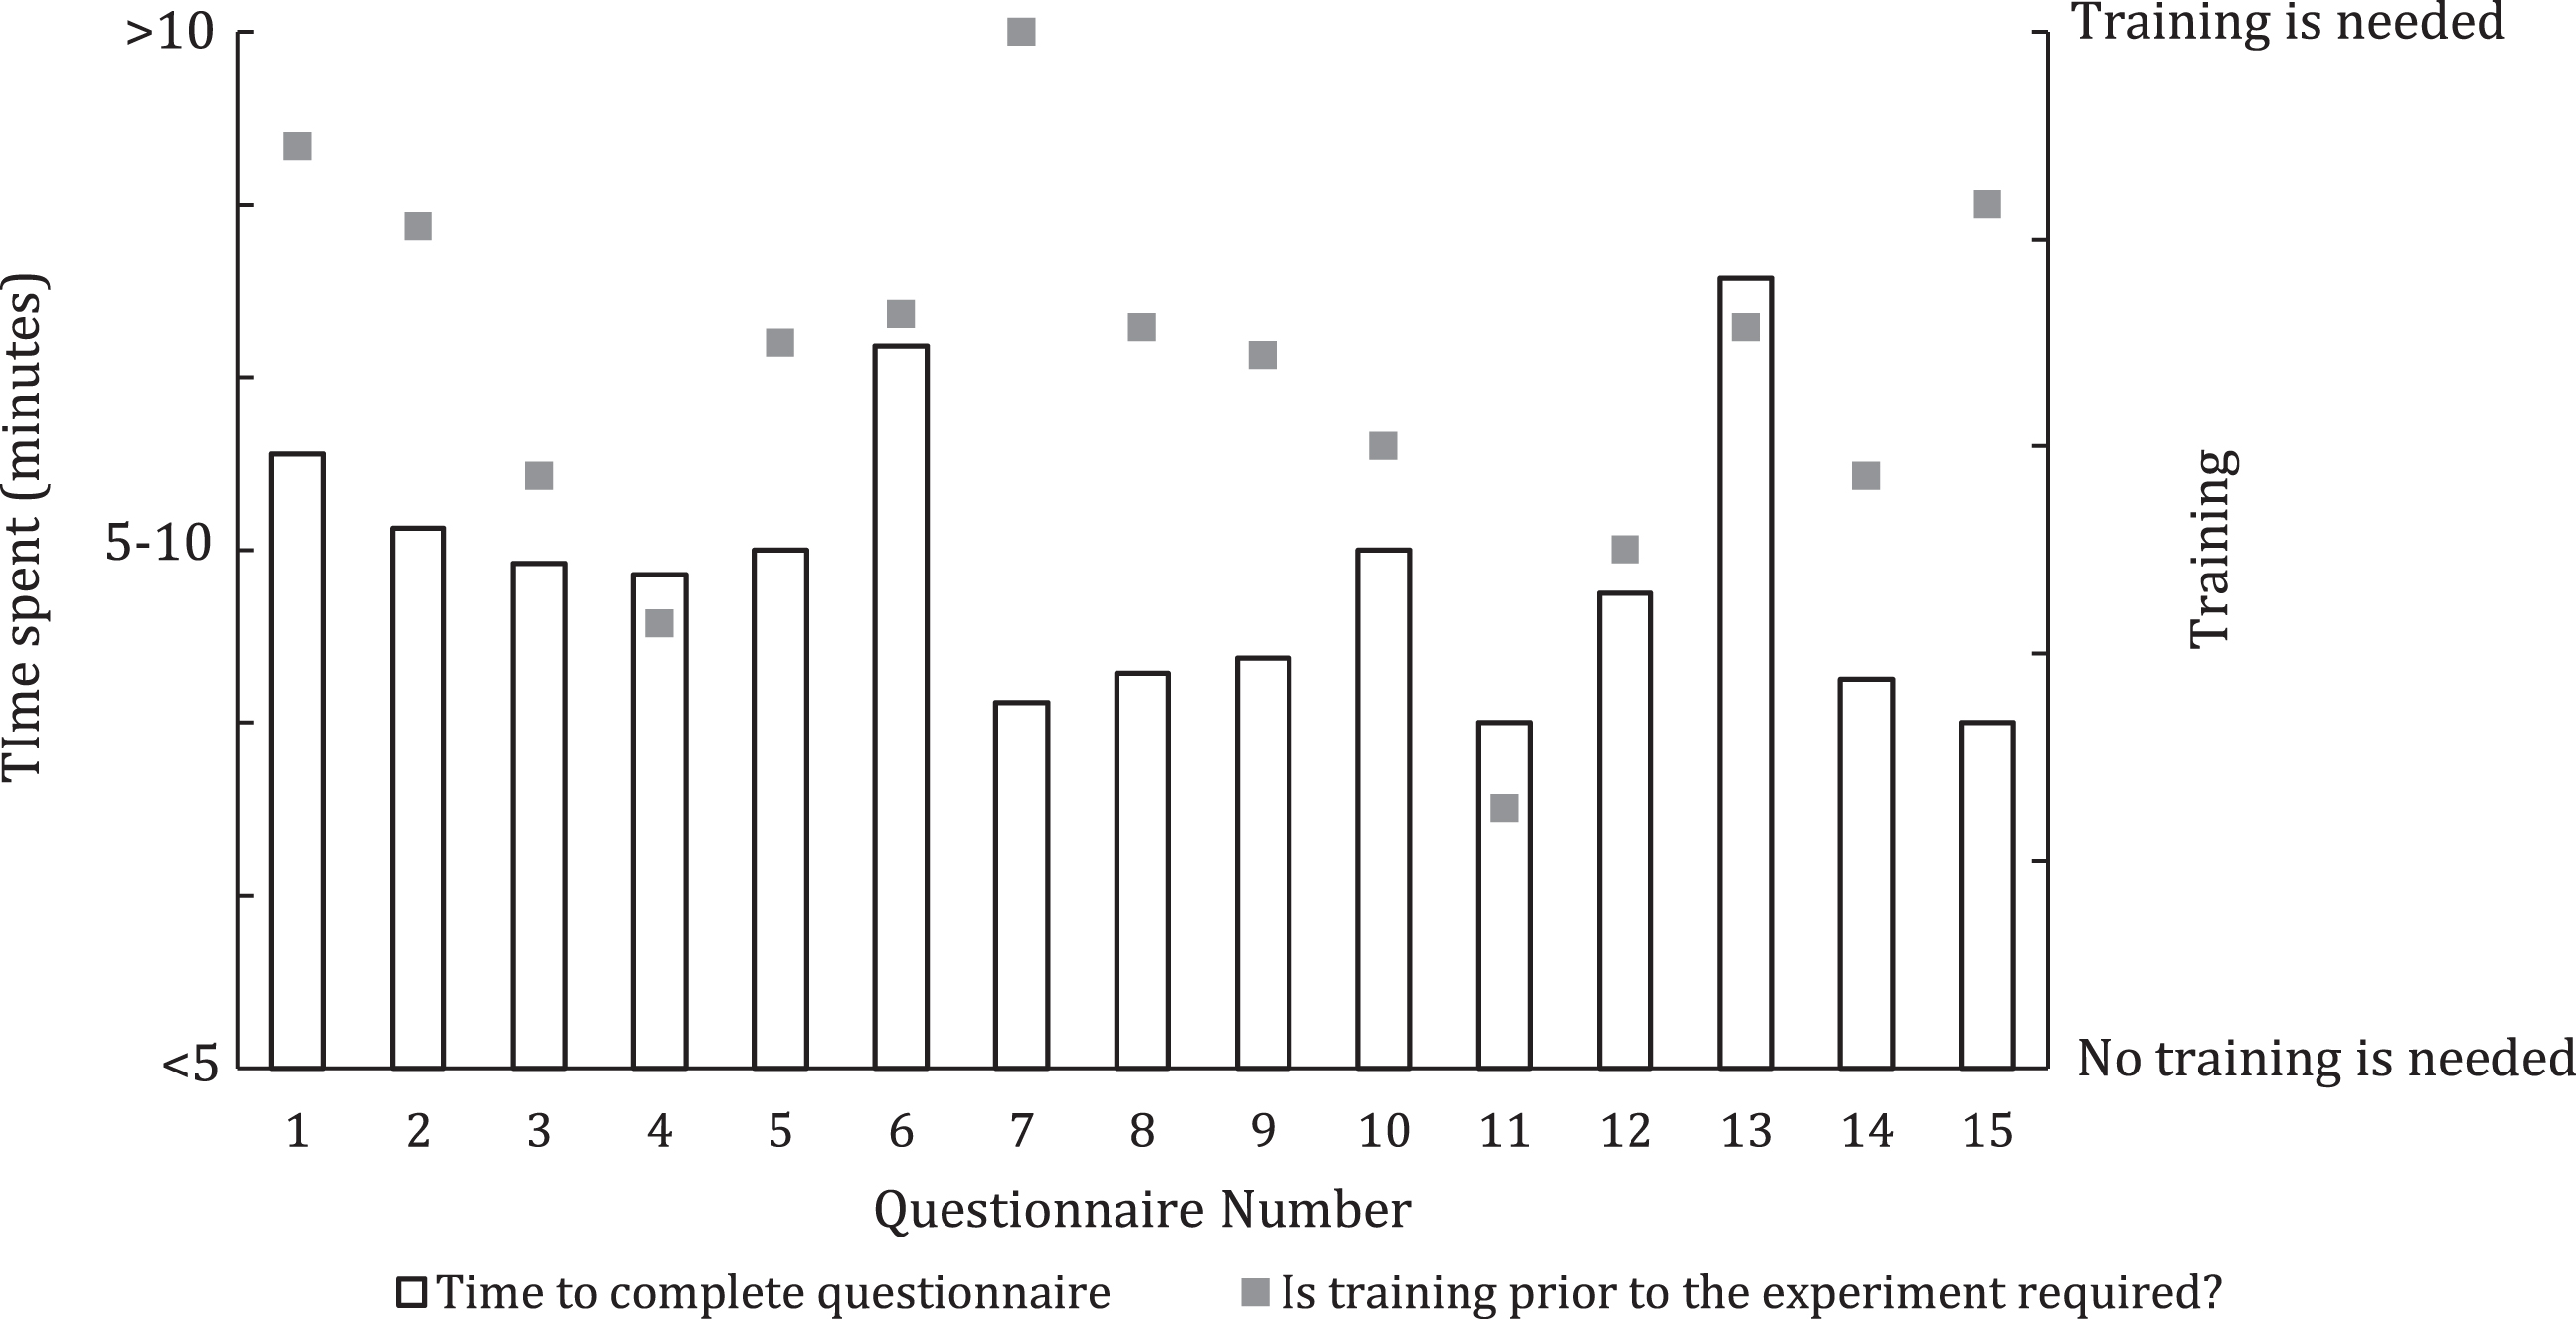 Individual evaluation of questionnaires regarding needed time and training.